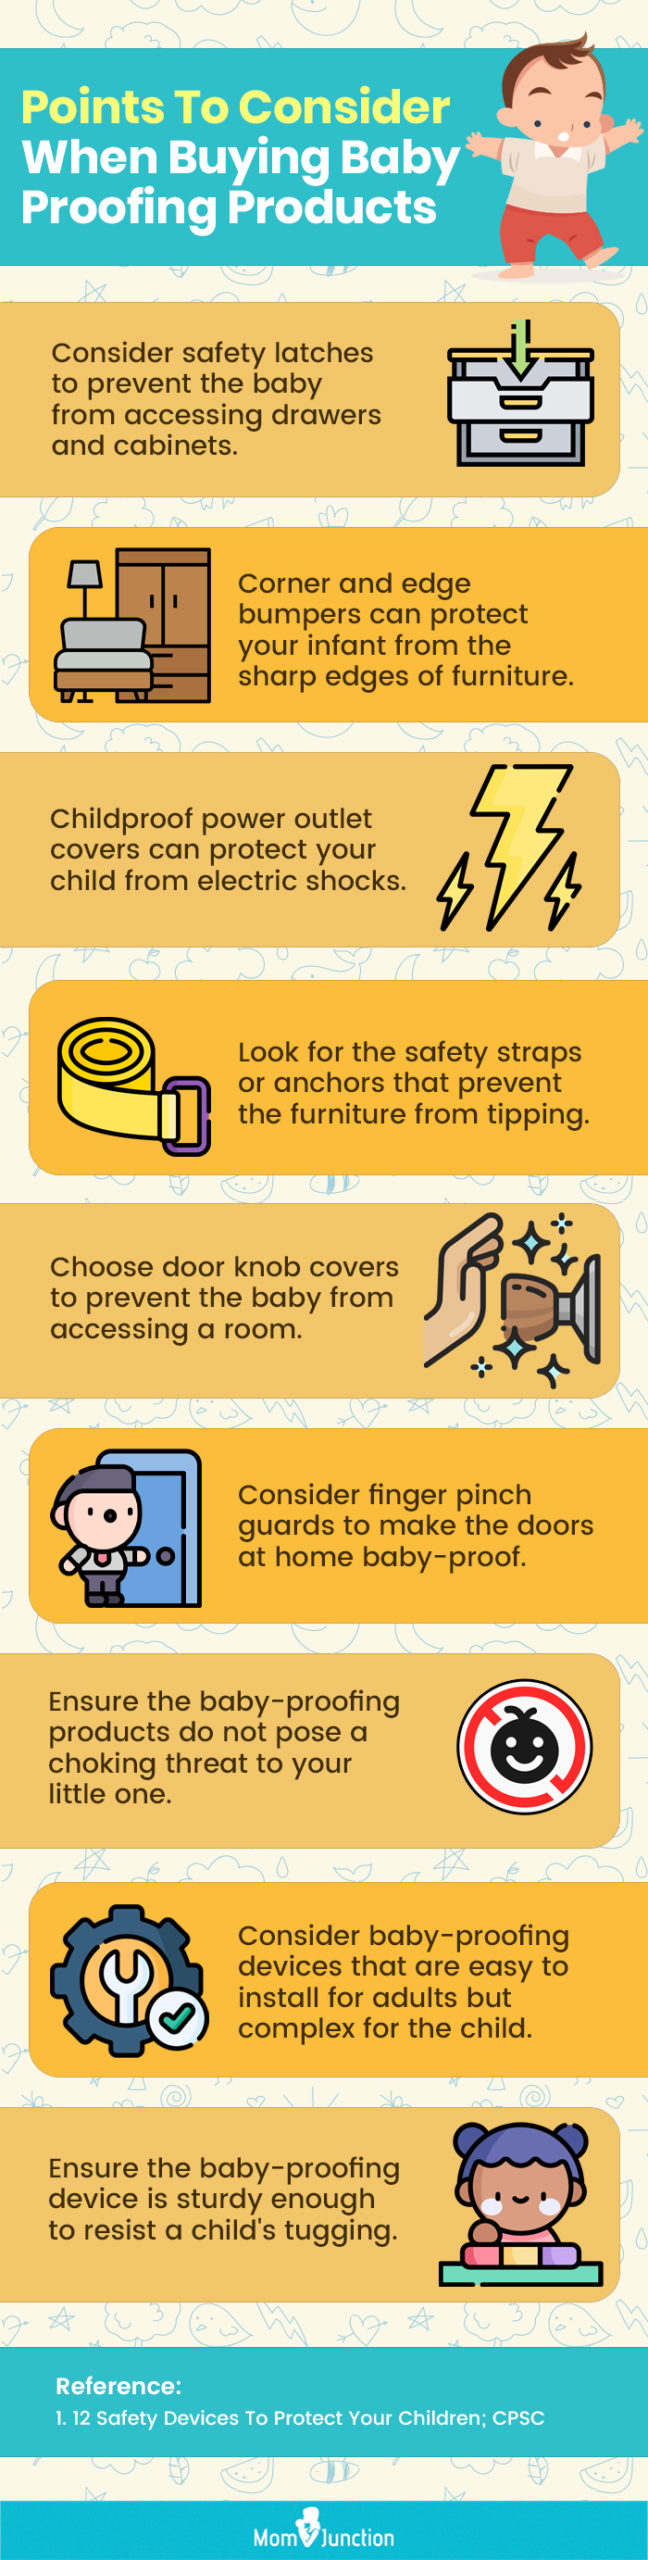 DIY Baby-Proofing Products for Parents